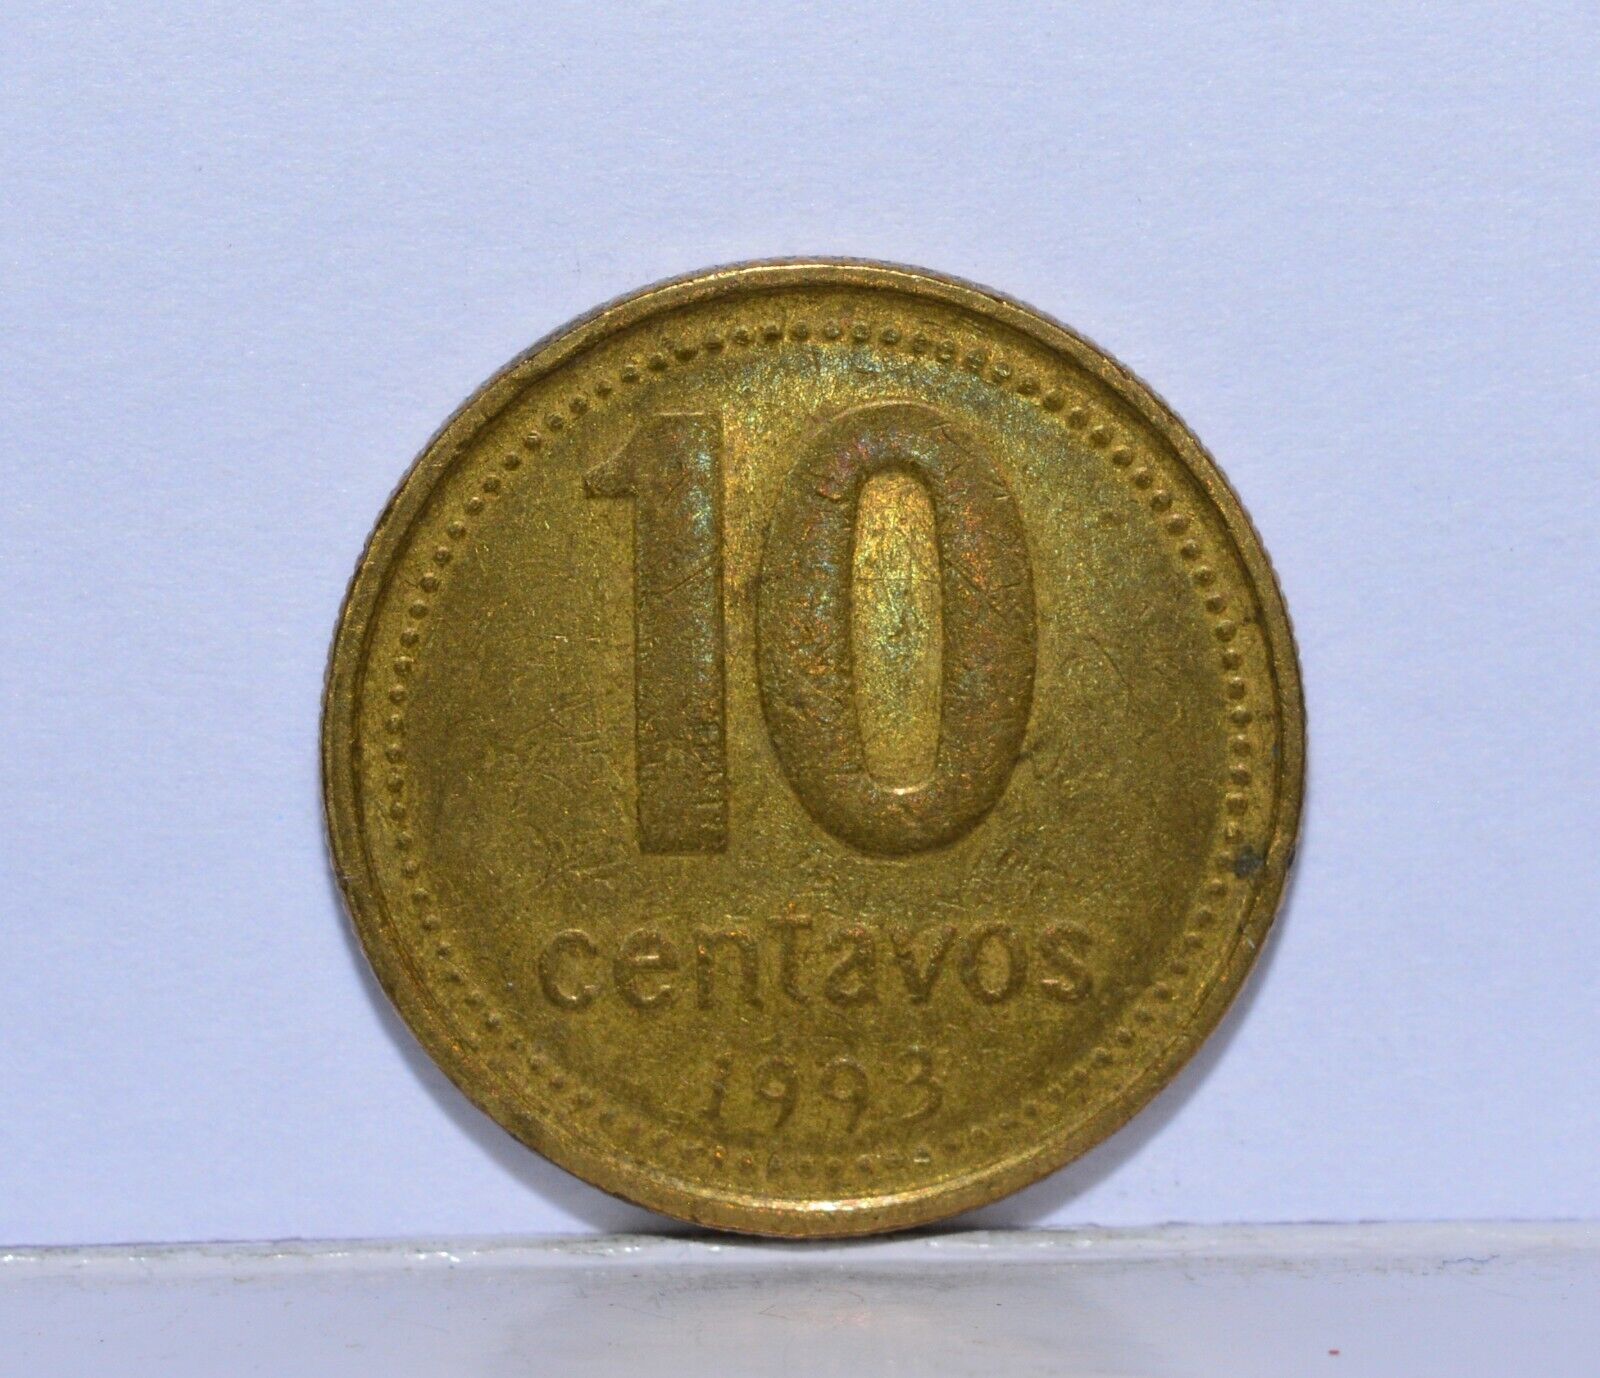 1993 Argentina 10 Centavos World Coin - Free Shipping Within Us!